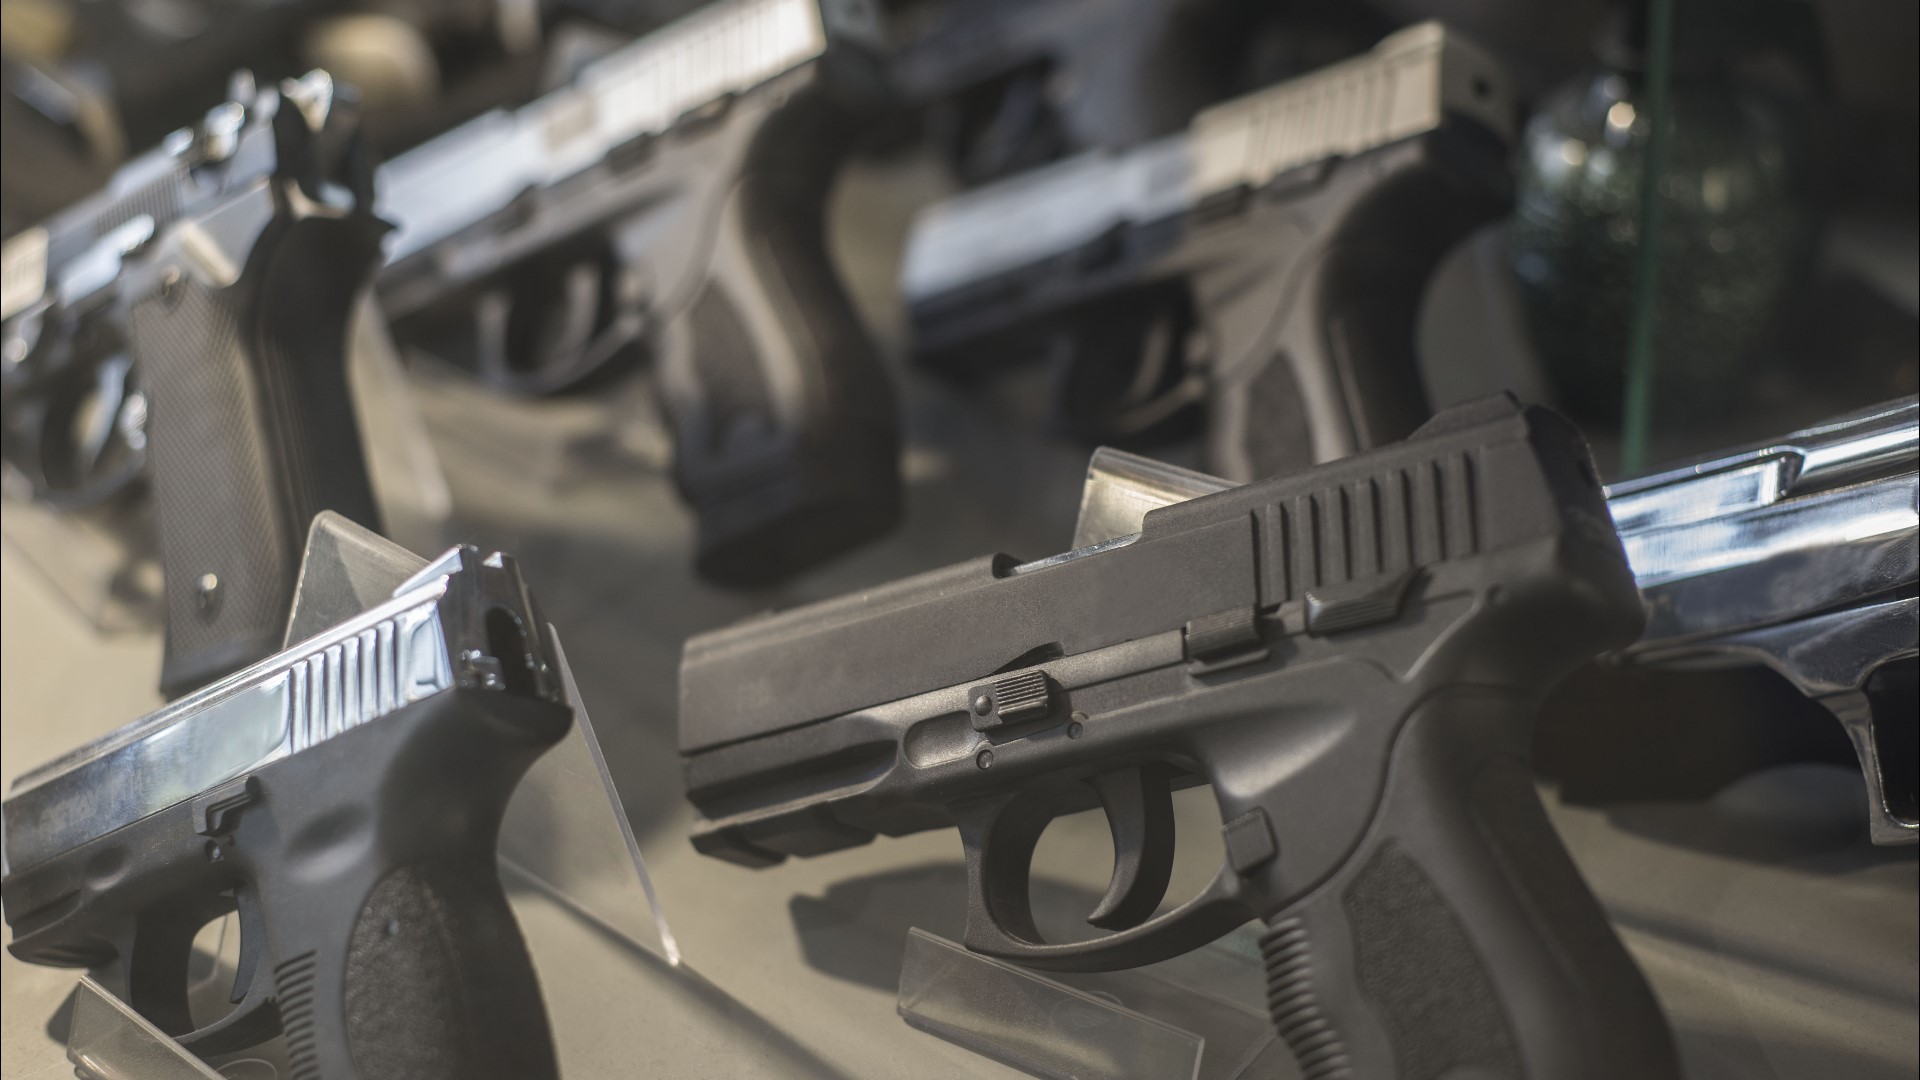 County officials approved a resolution that says Jasper County employees can't enforce state or federal laws that infringe on a person's Second Amendment rights.